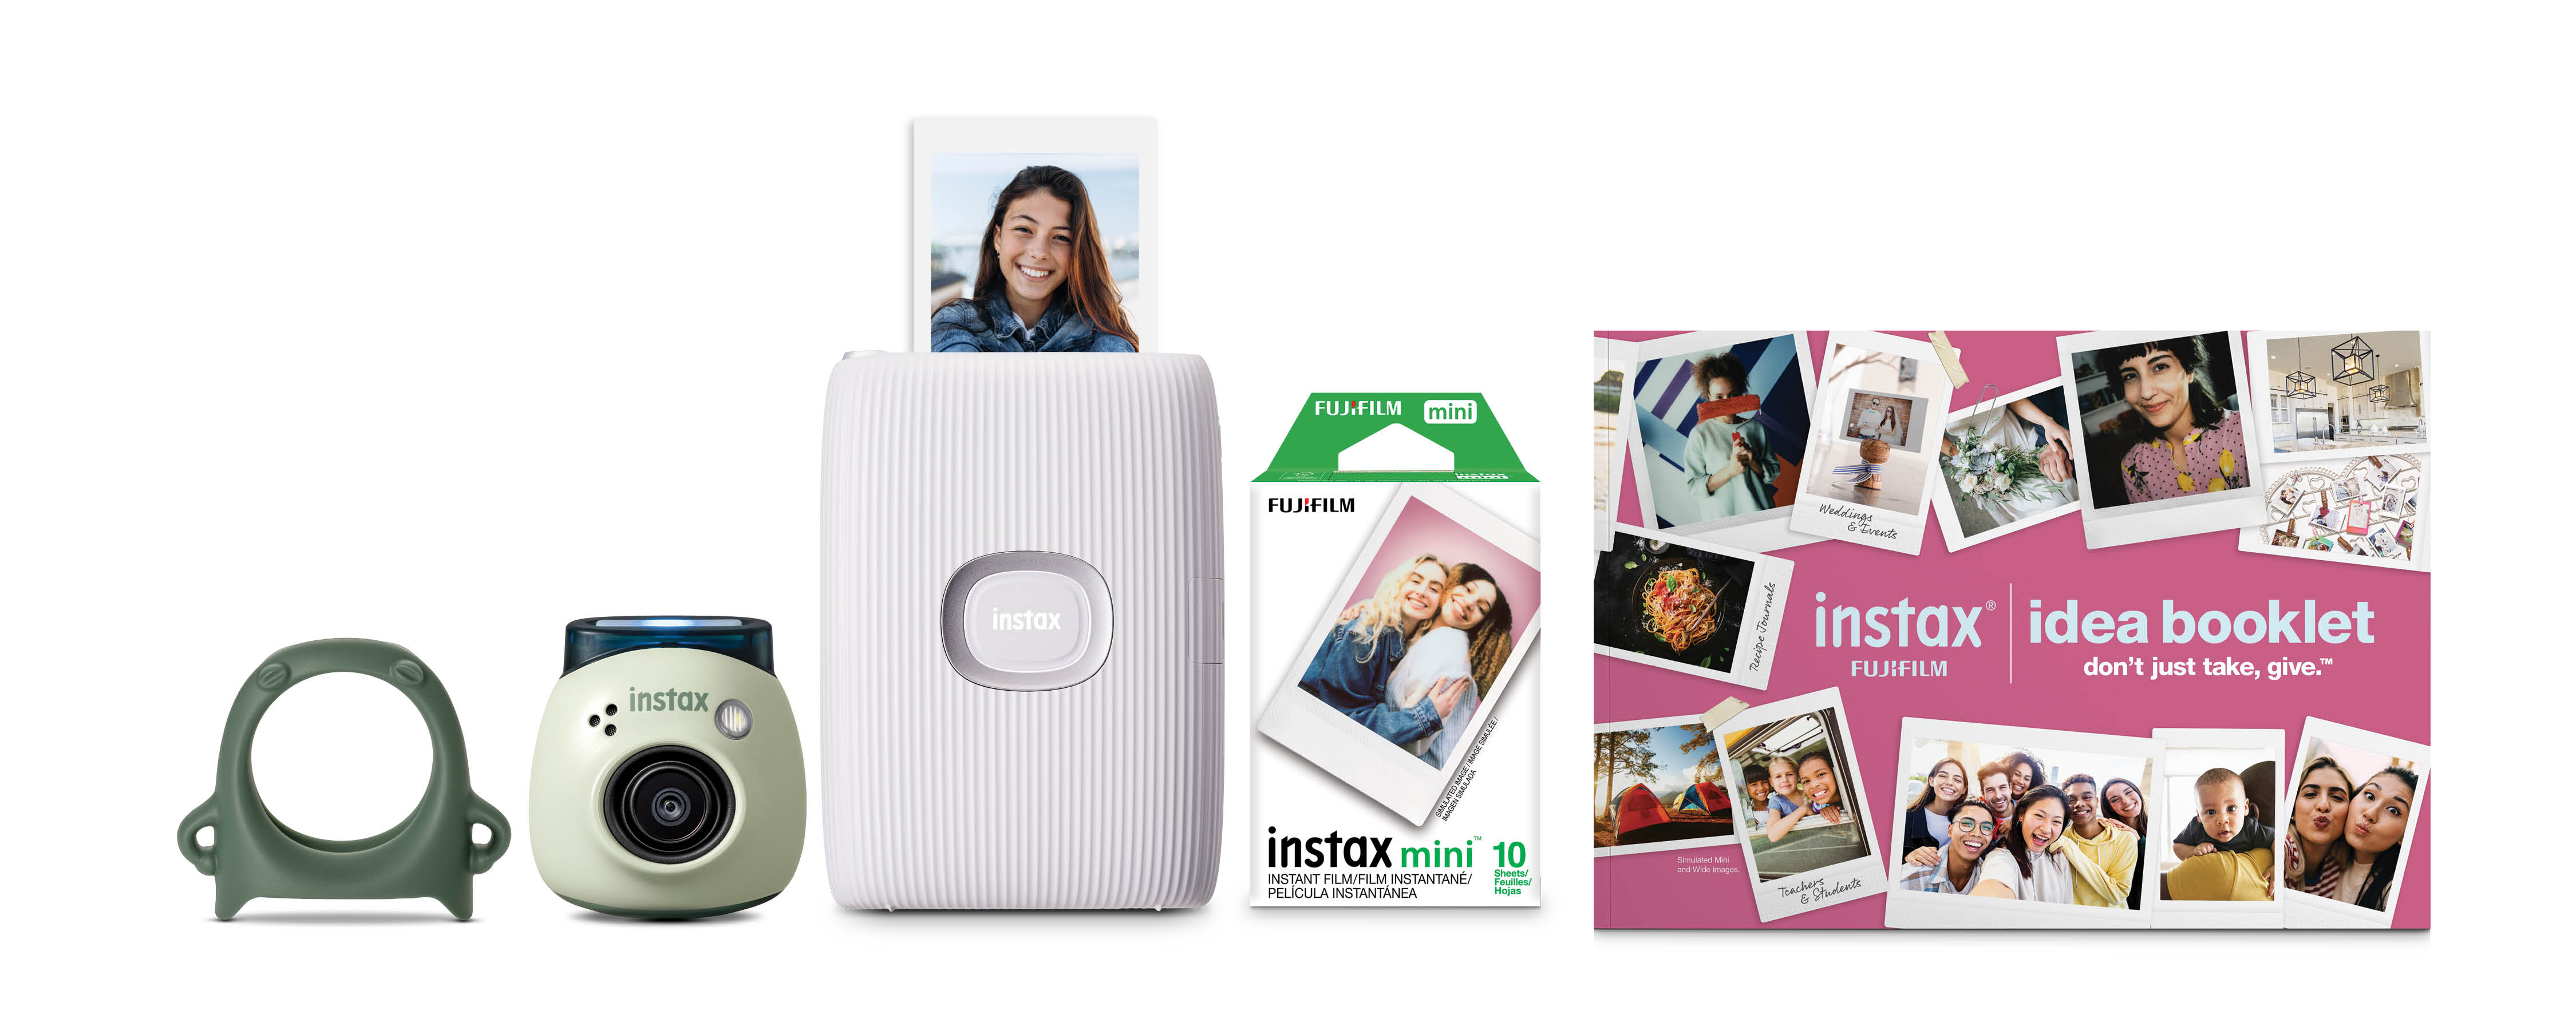 Fujifilm Instax PAL with Link 2 Smartphone Wireless Printerm and 10 Pack Film Bundle, Green - image 1 of 9